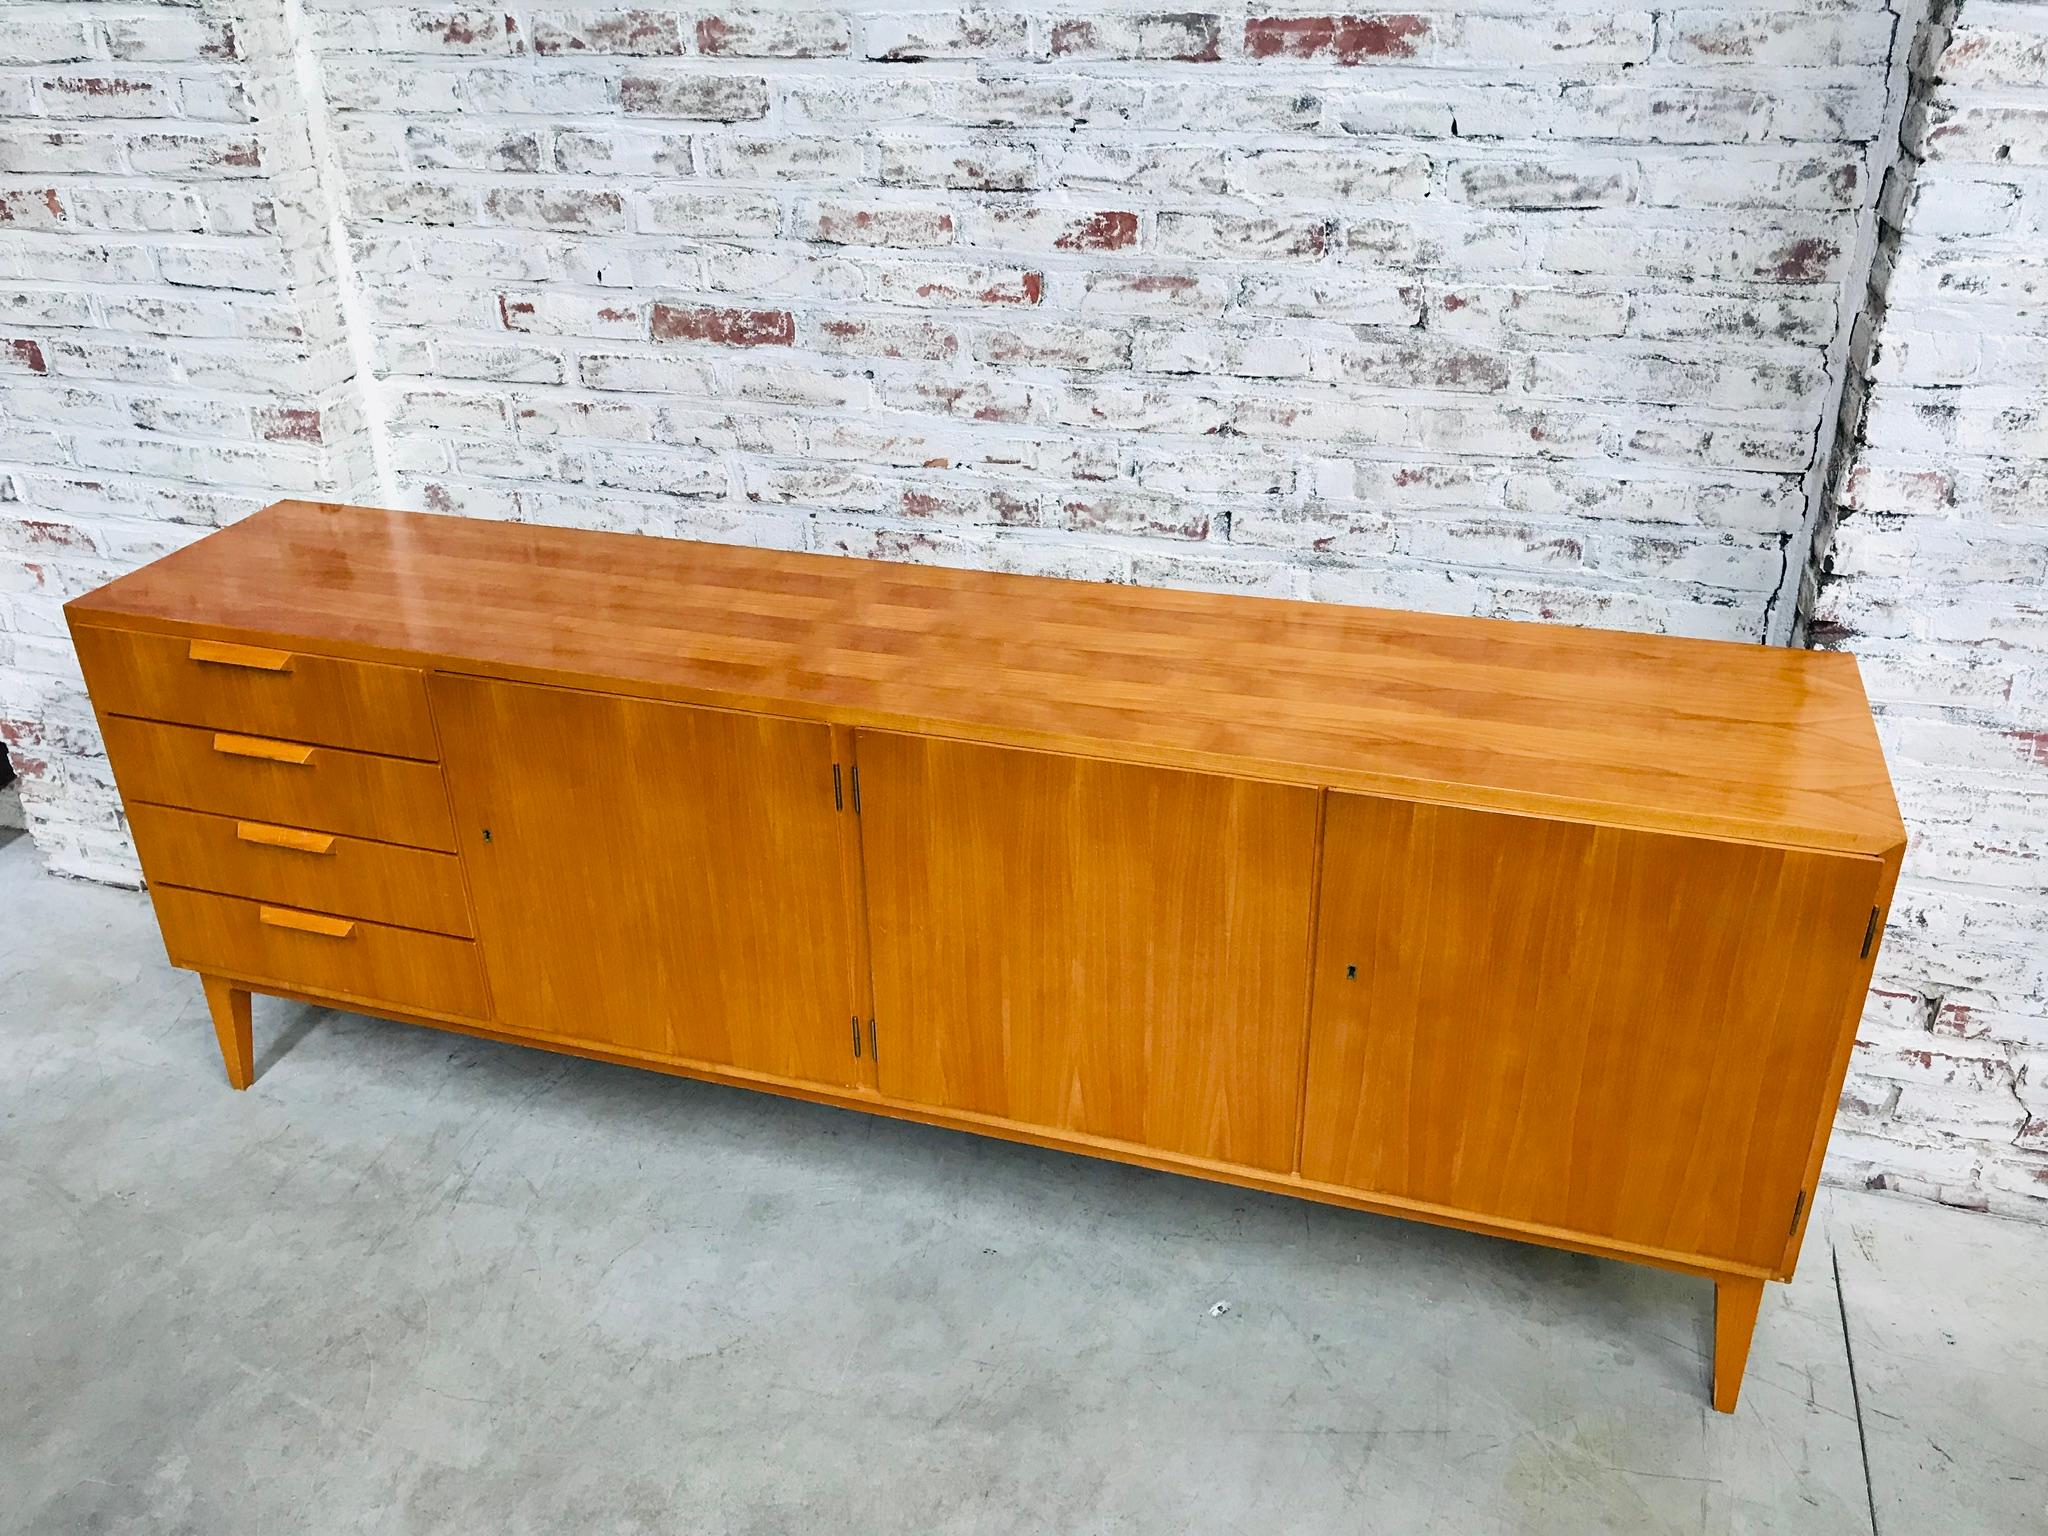 This sideboard was manufactured in West-Germany in the late 1960s. The maker used a special technique in woodwork in order to create a “checkered” surface on the front of the sideboard. If you look on the top and both sides you see the French